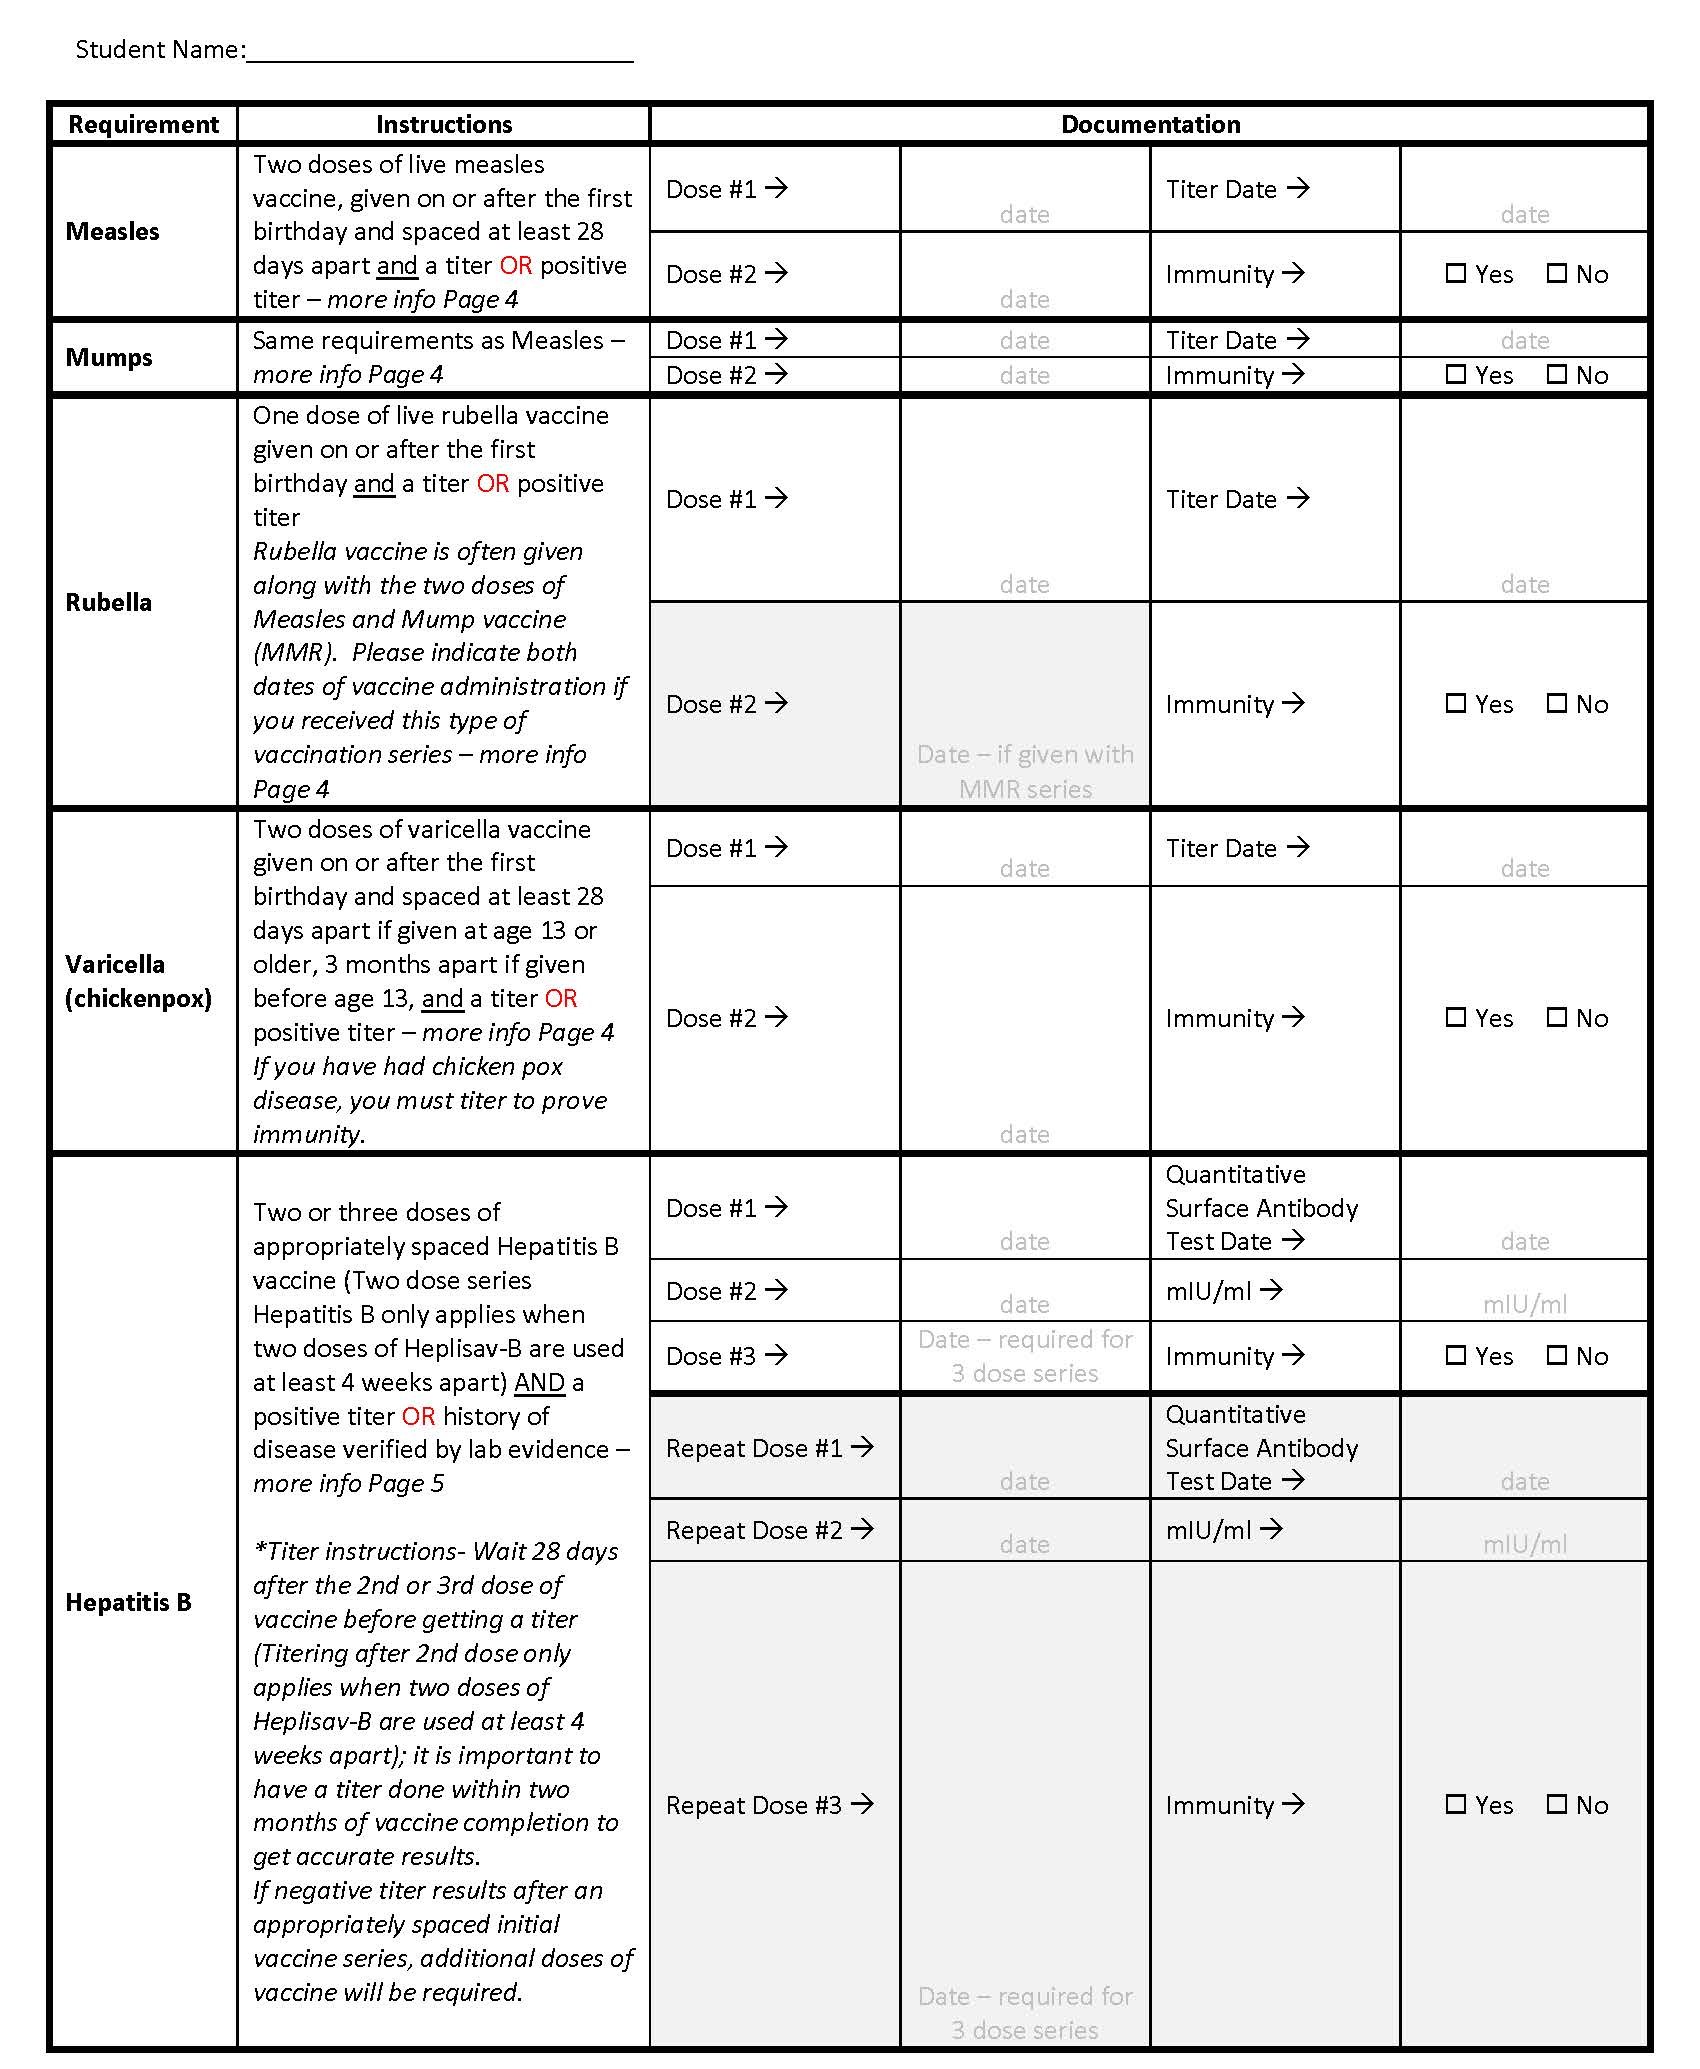 Healthcare Professional Student Information Form & Chart [PA Medicine]_Page_2.jpg